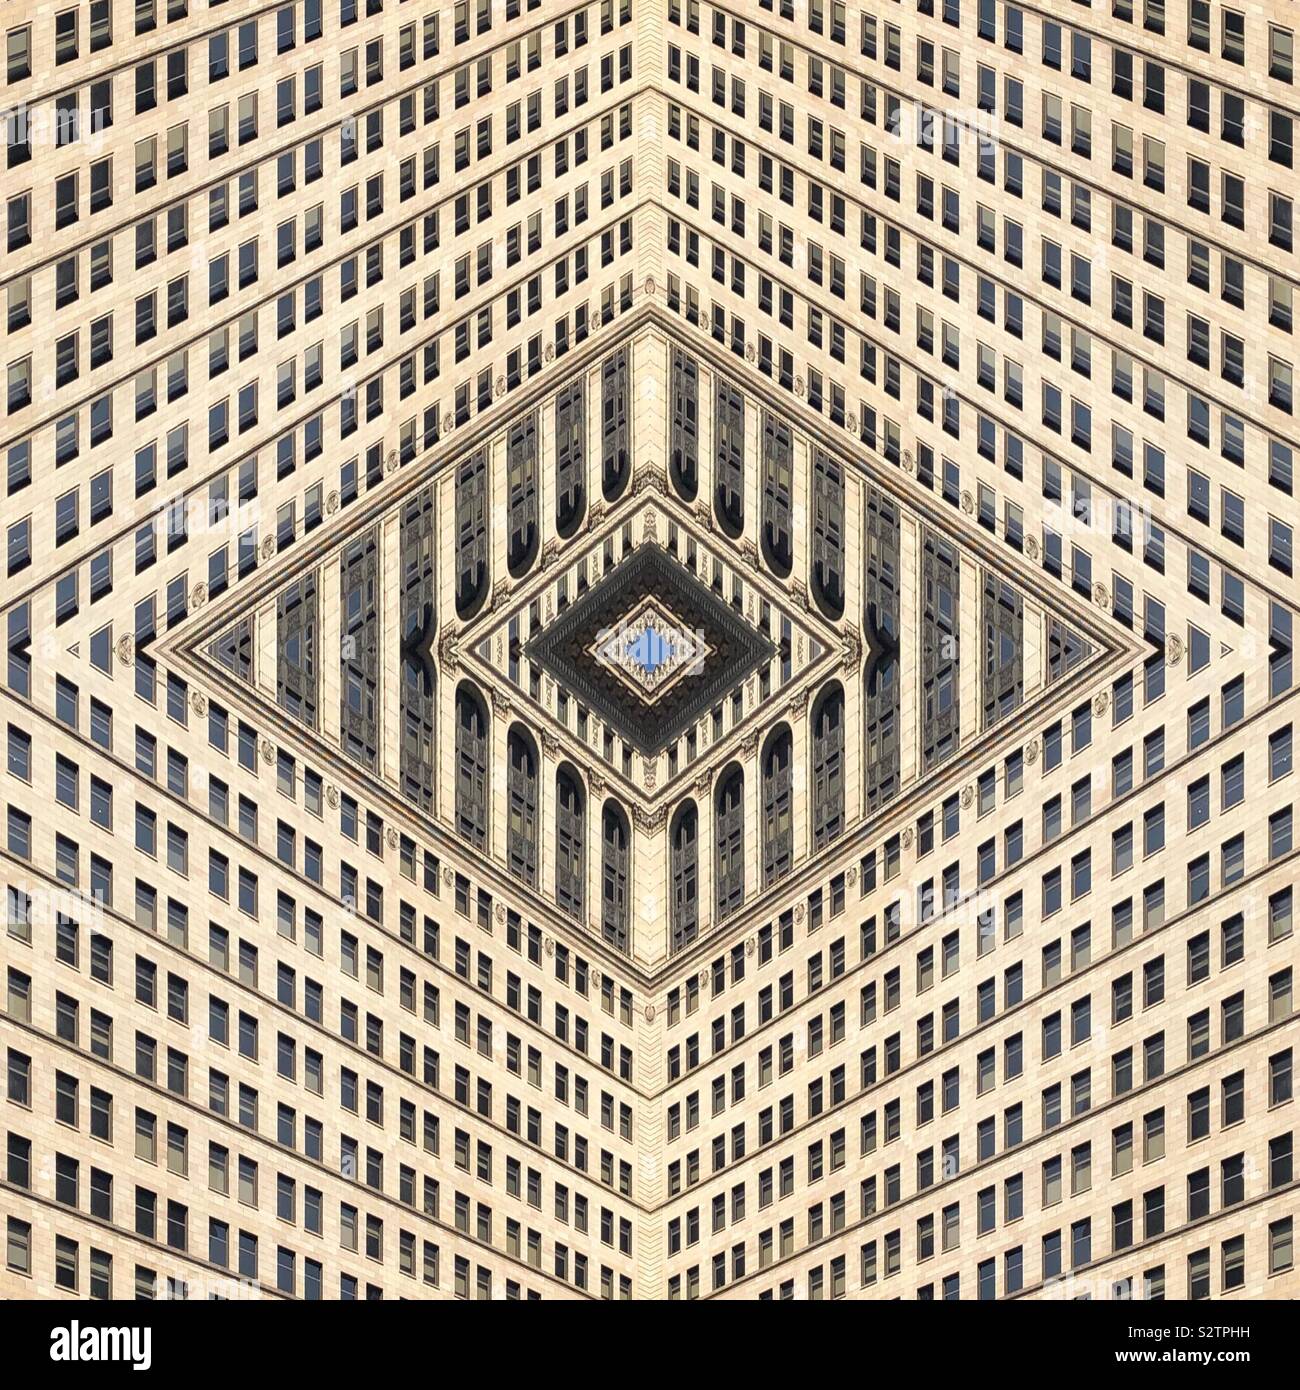 An abstract pattern created from the windows on a city building Stock Photo